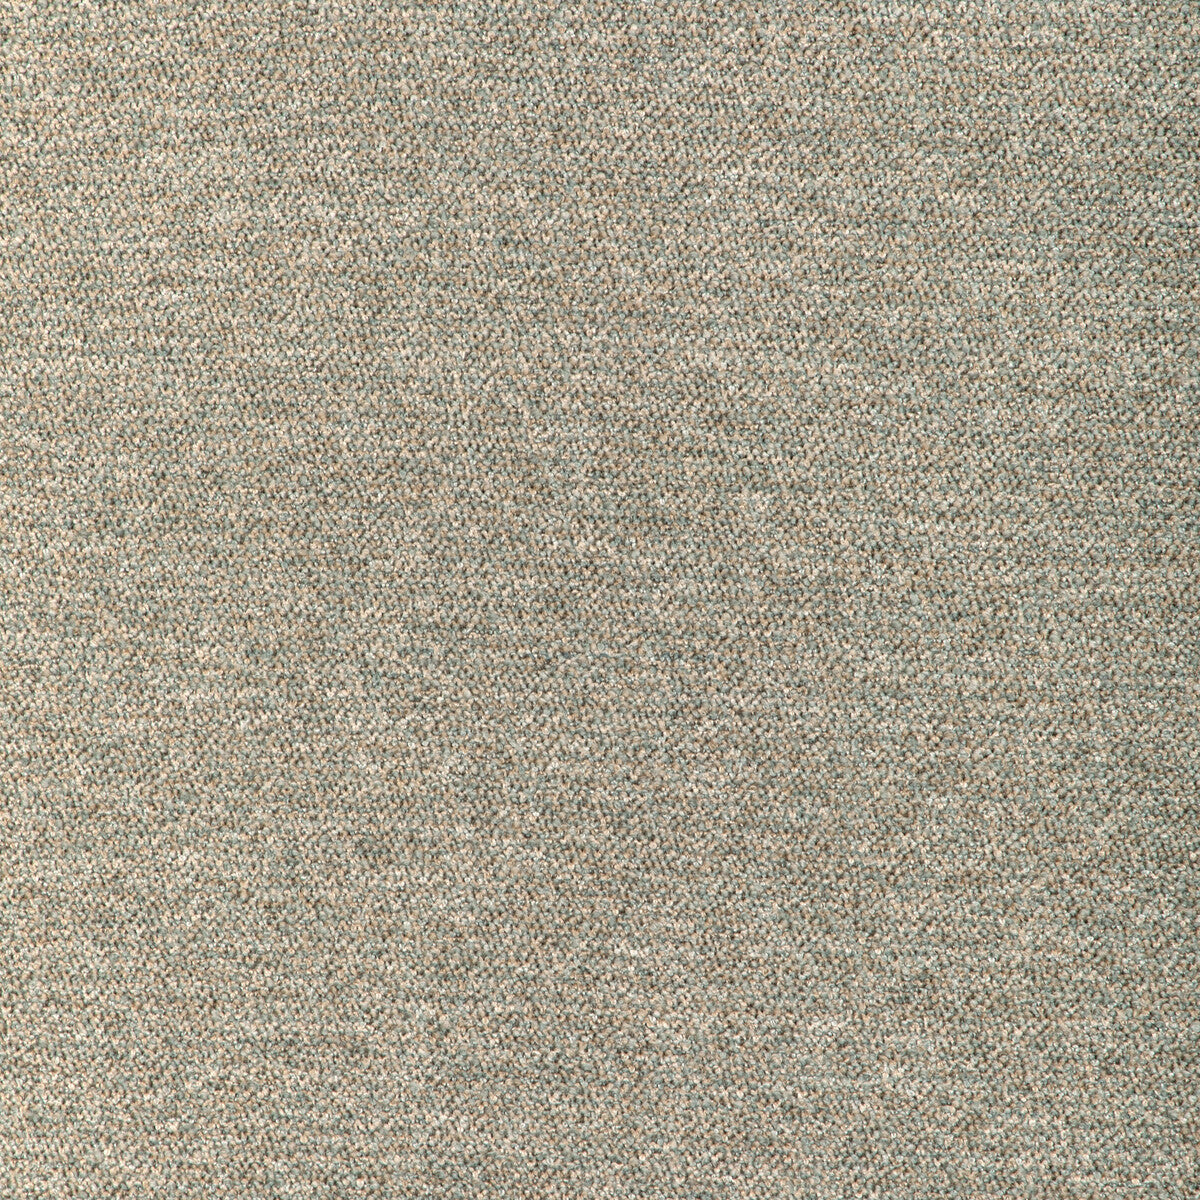 Kravet Design fabric in 37180-1311 color - pattern 37180.1311.0 - by Kravet Design in the Woven Colors collection